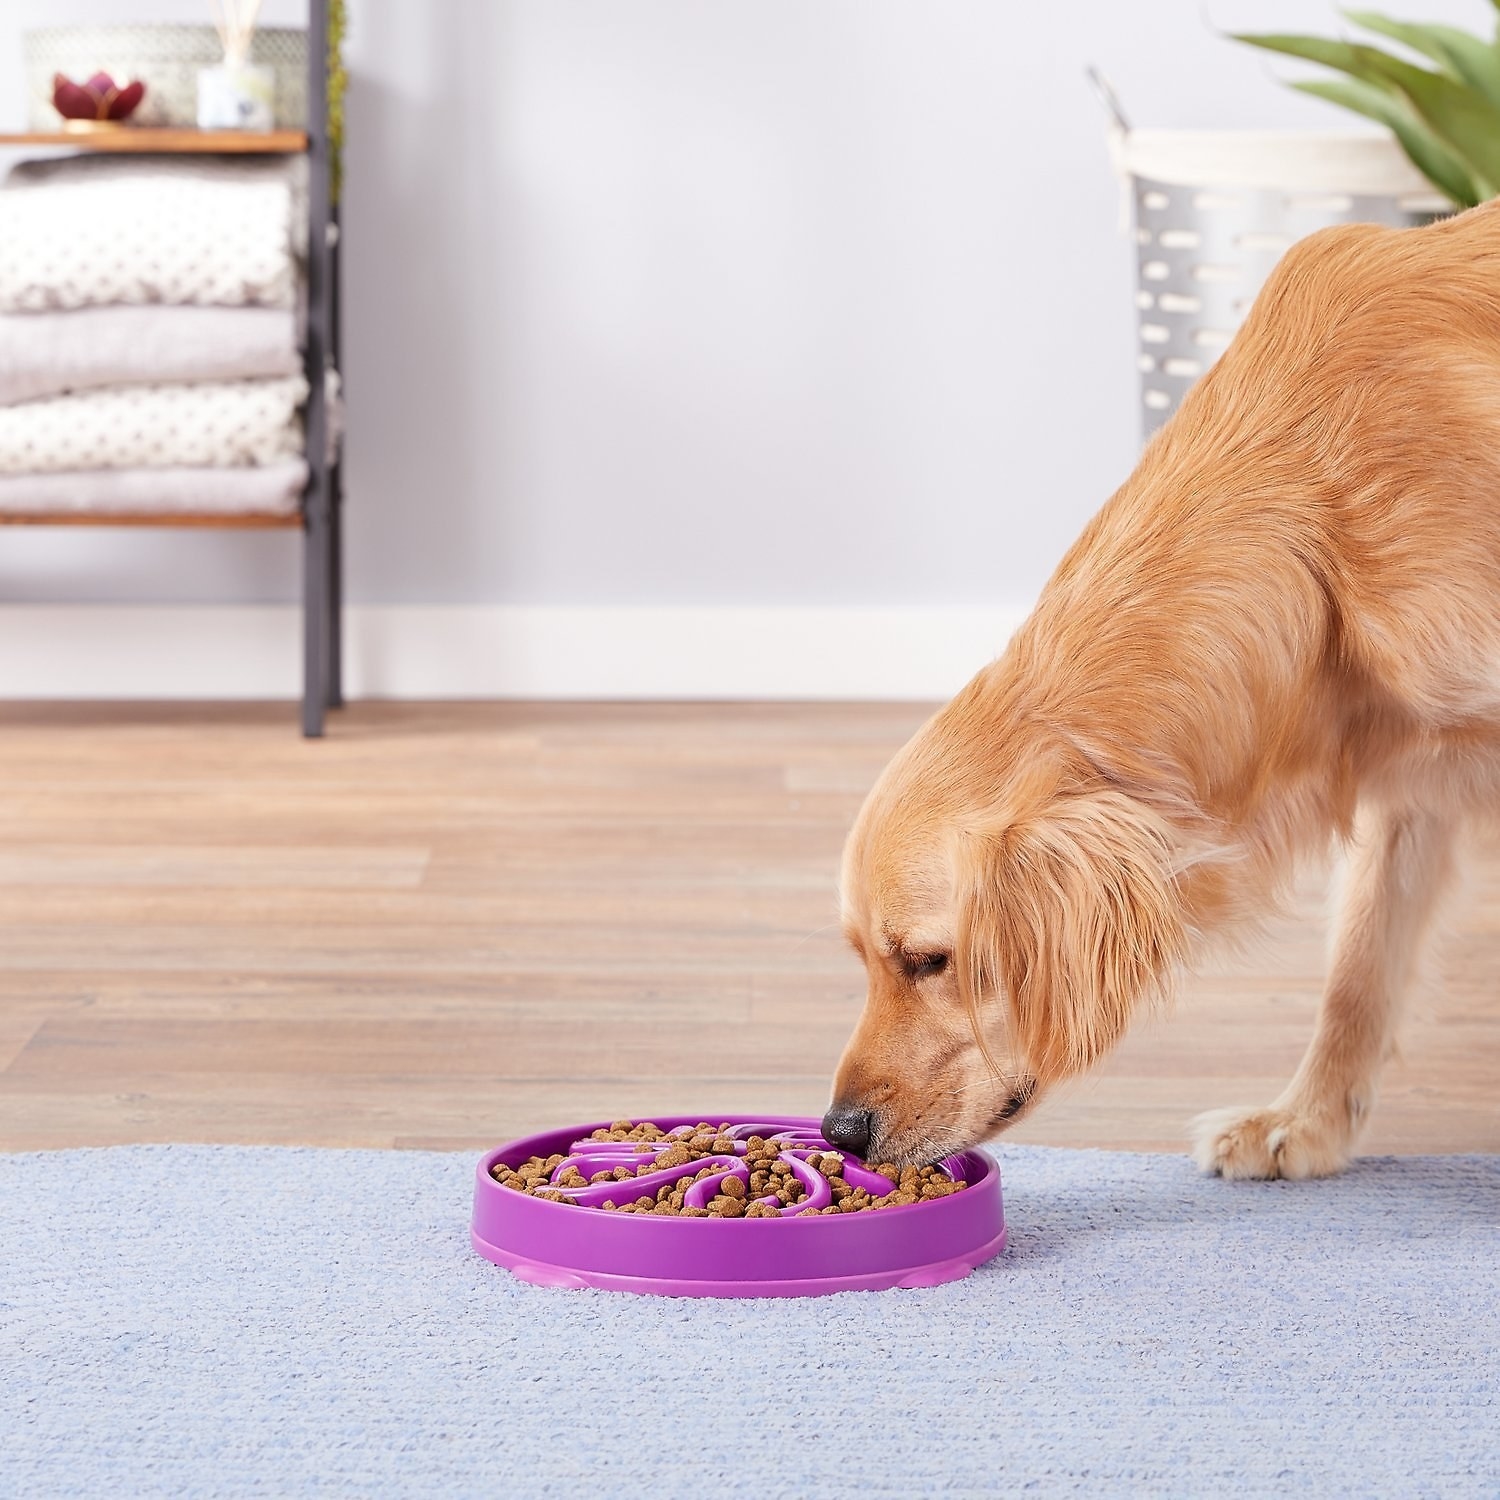 A dog eating a meal out of the regular bowl